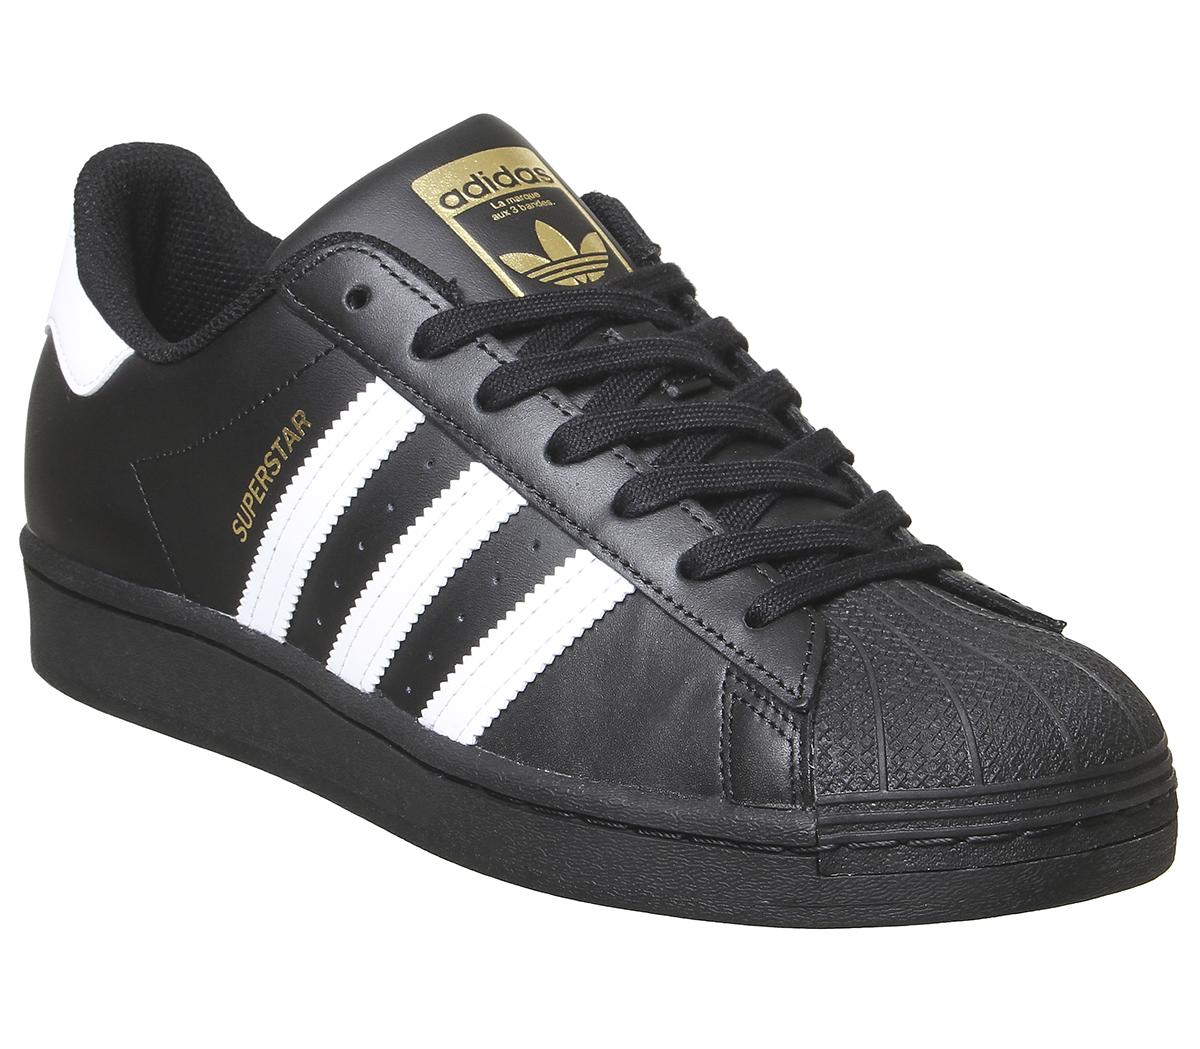 adidas Superstar Trainers Black White - Hers trainers